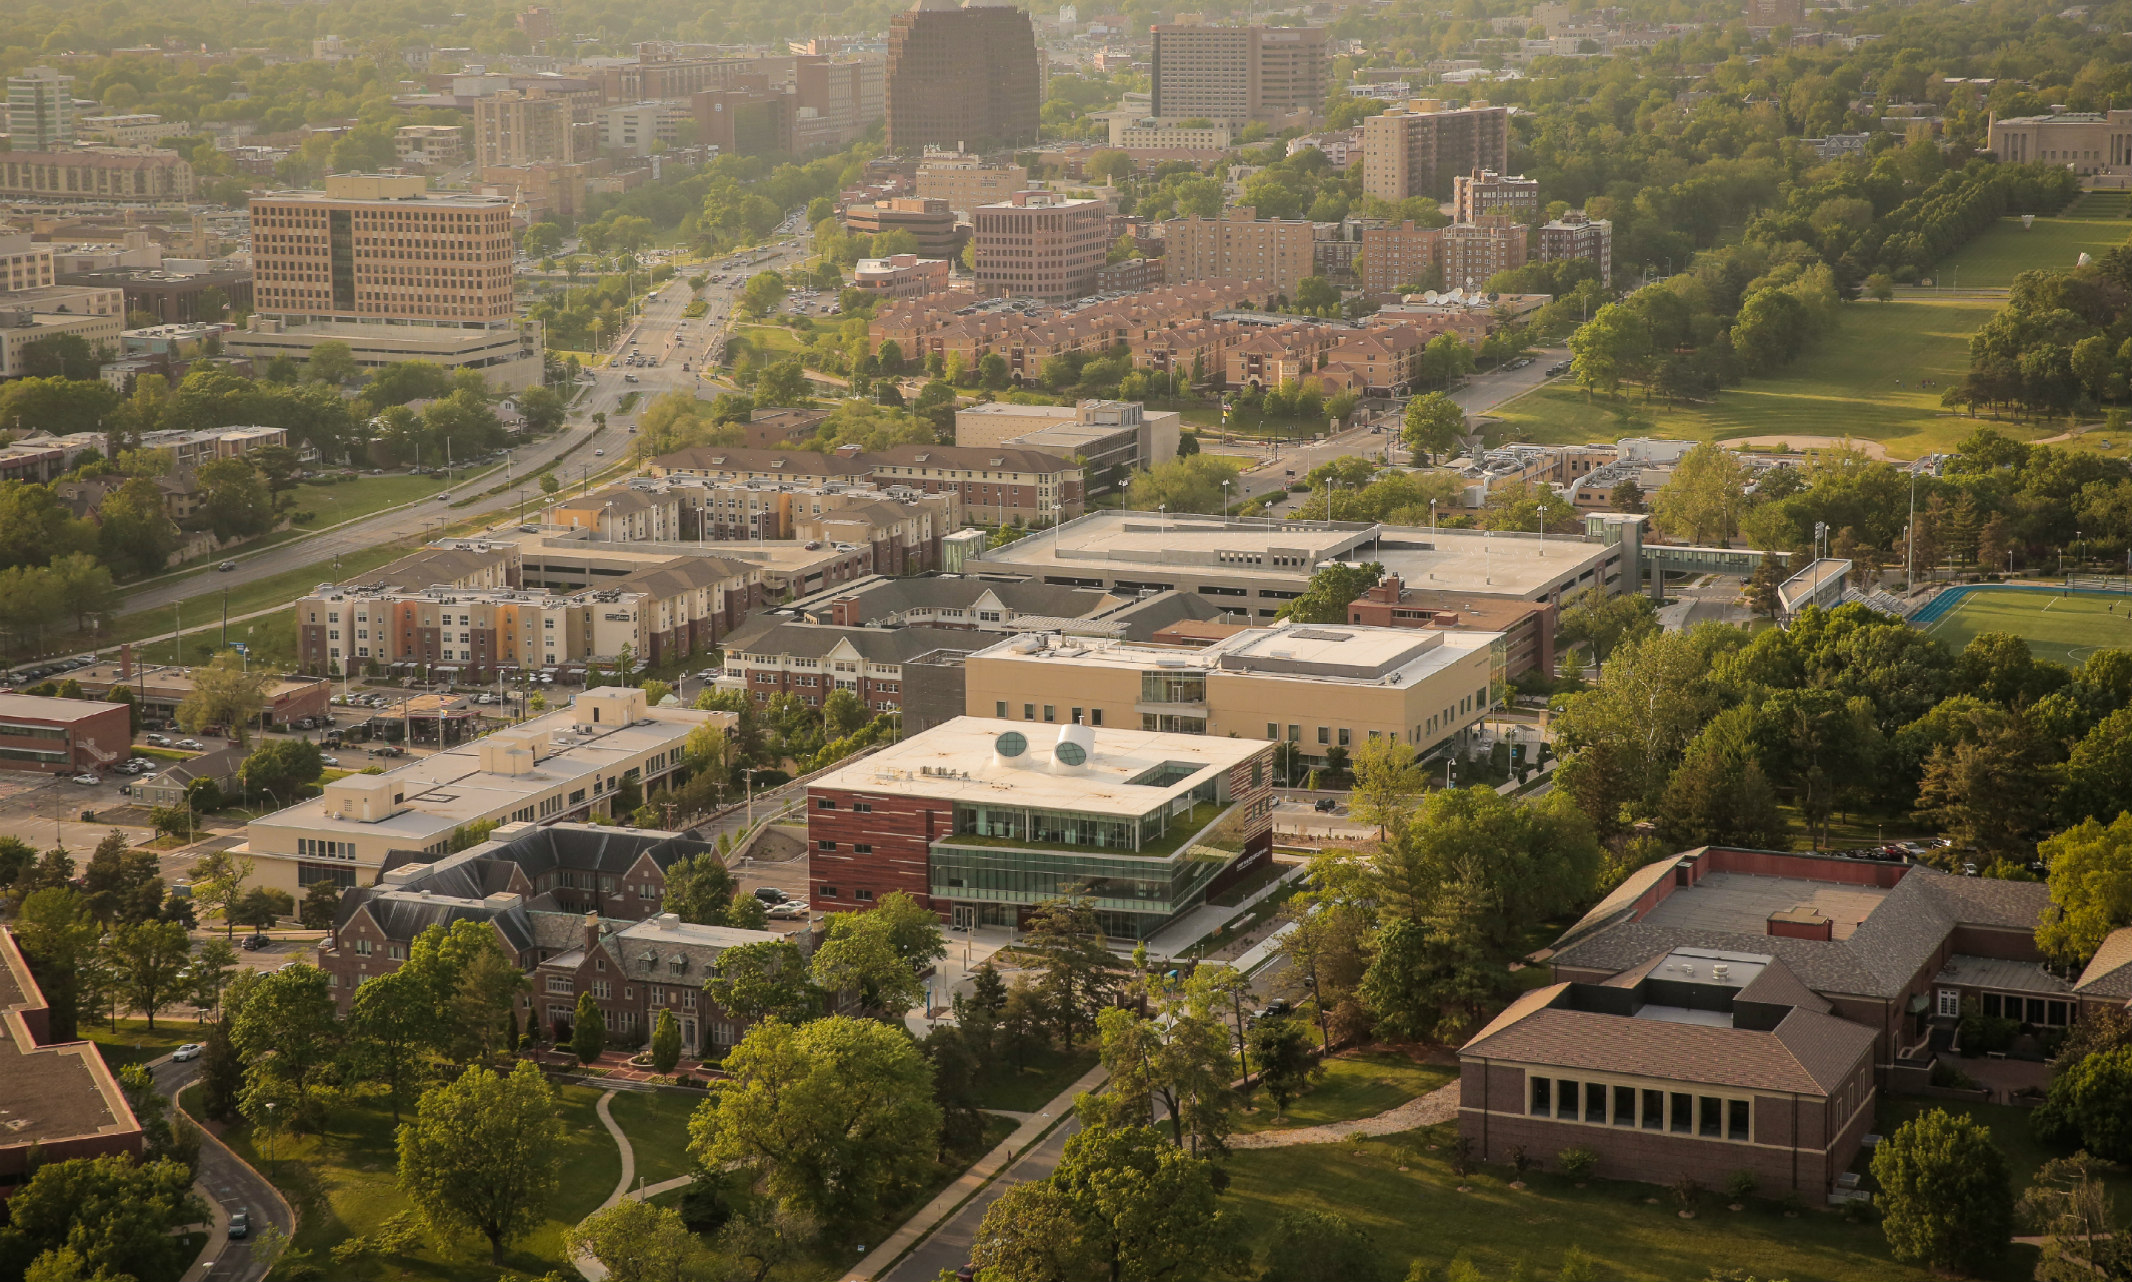 An aerial view of the UMKC campus and Kansas City